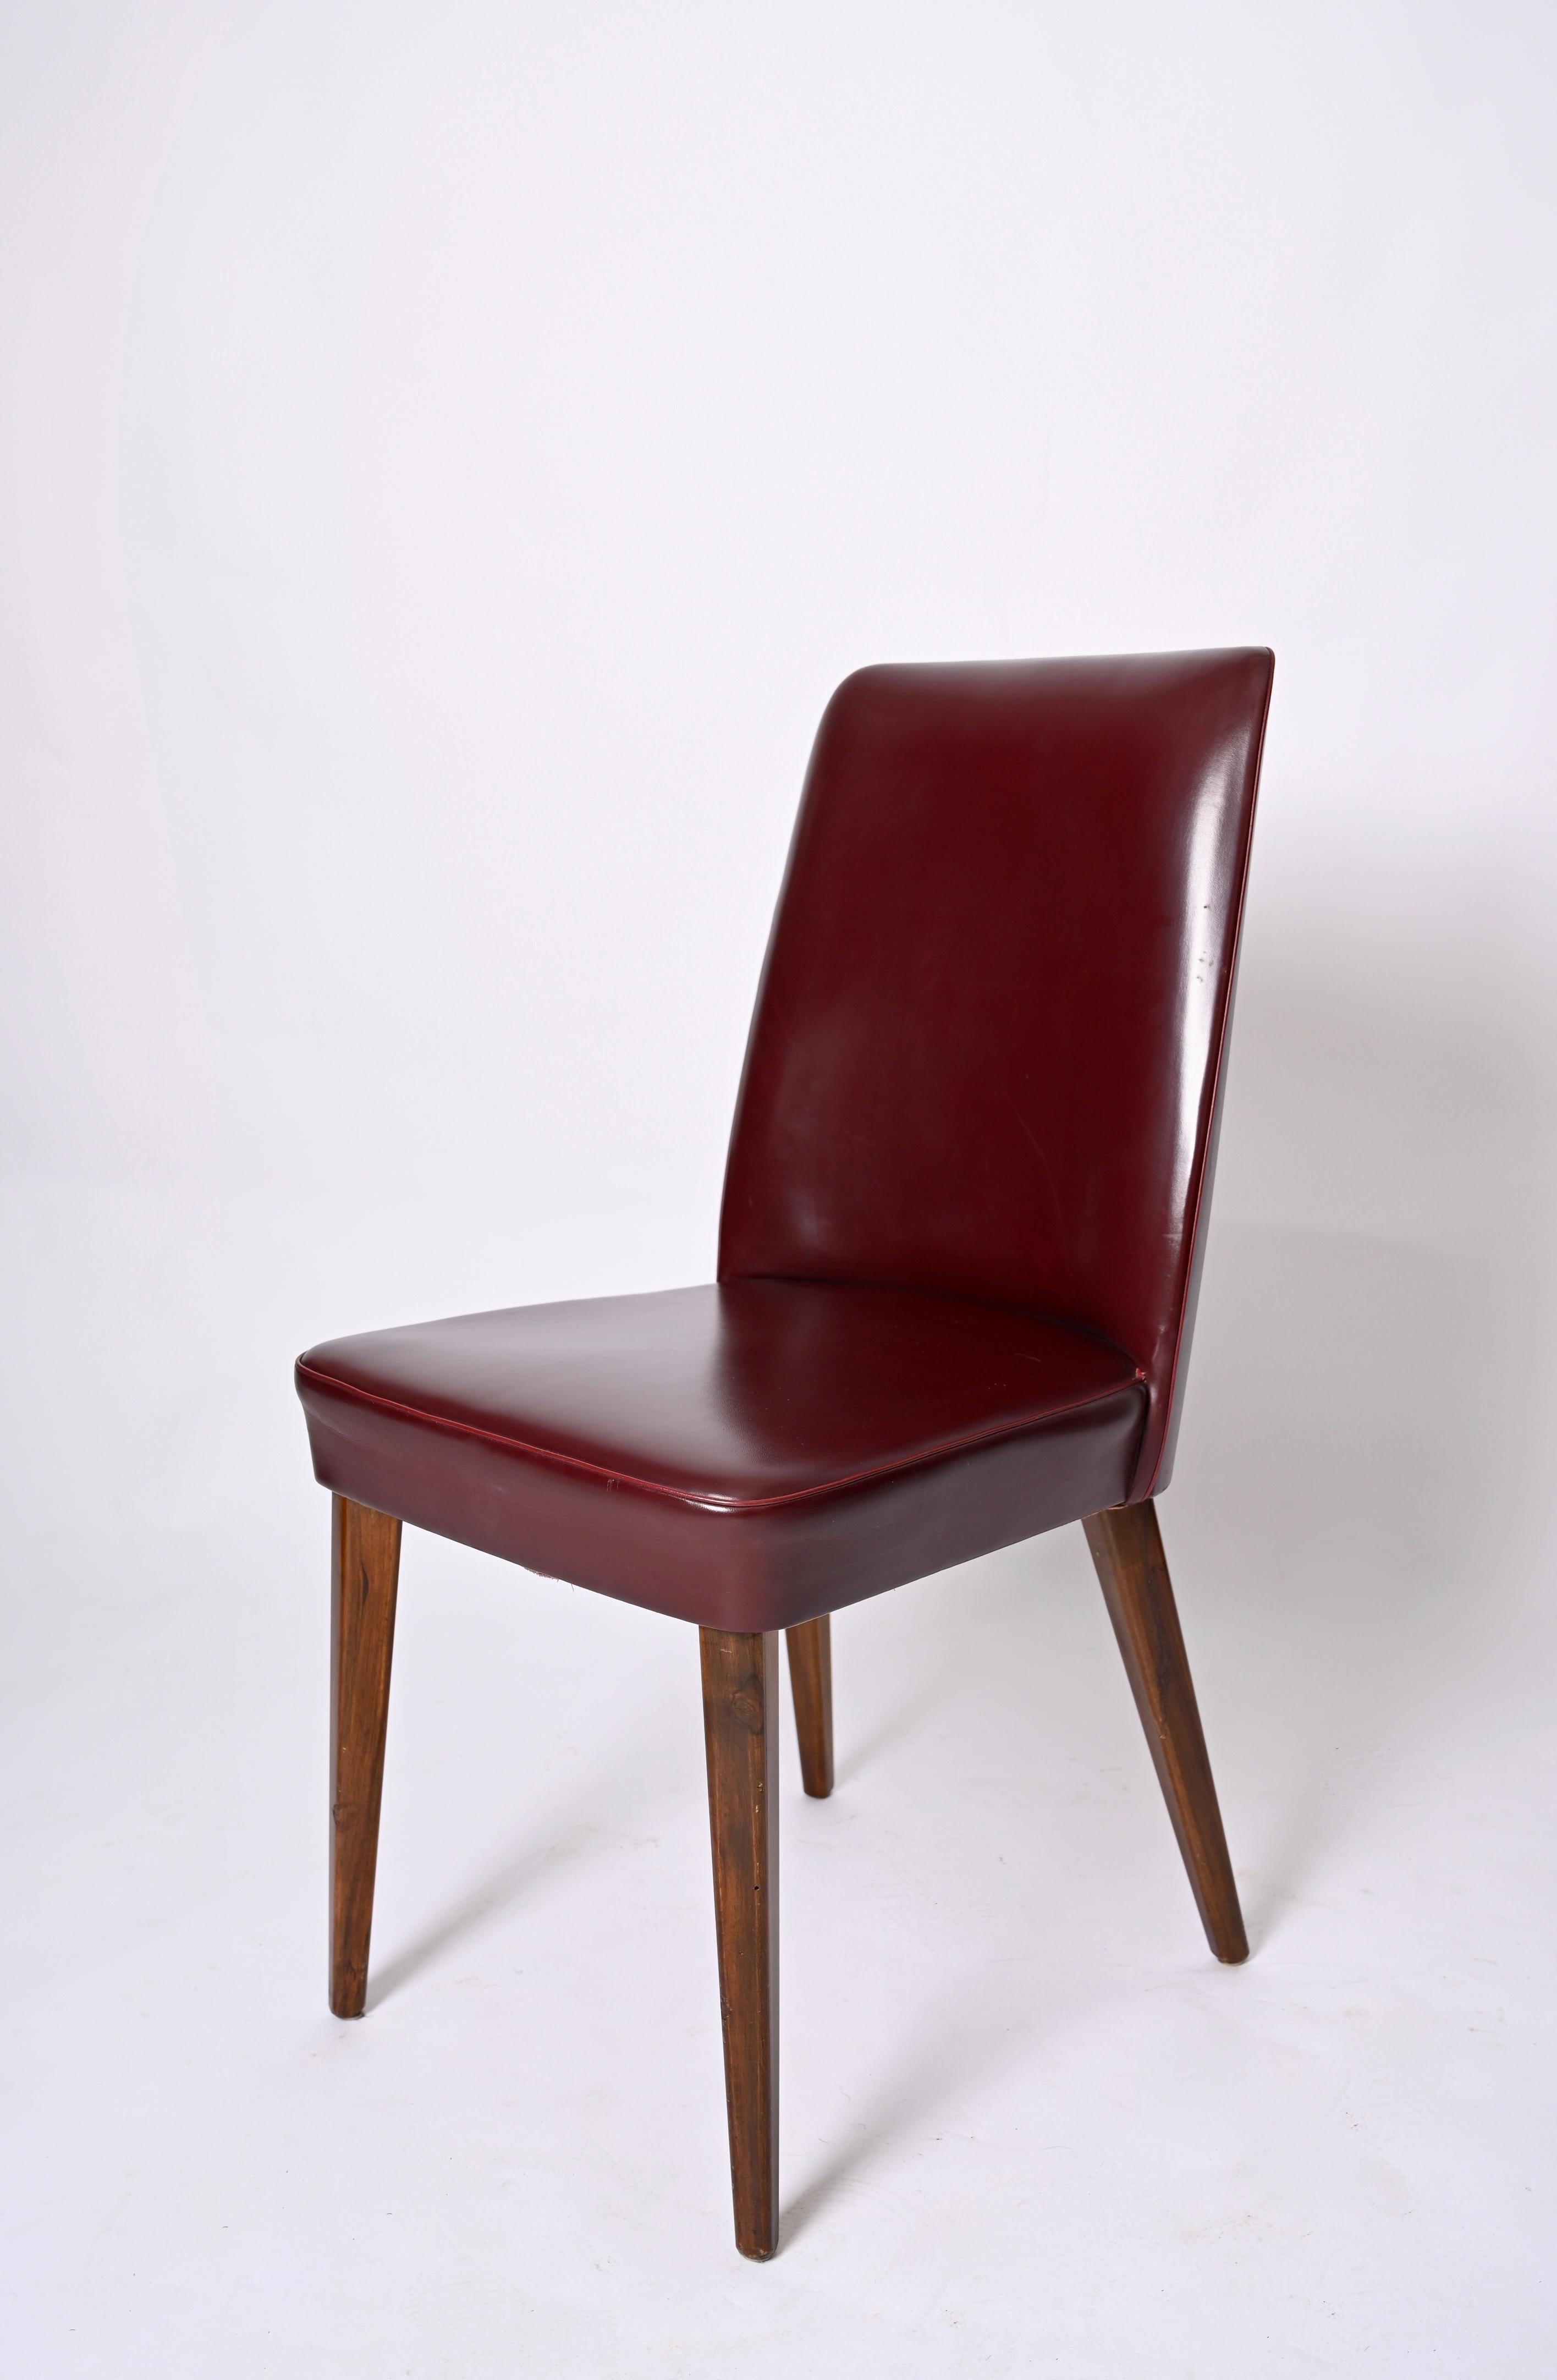 Pair of Bordeaux Leather Chairs by Anonima Castelli, Italy, 1950s For Sale 6